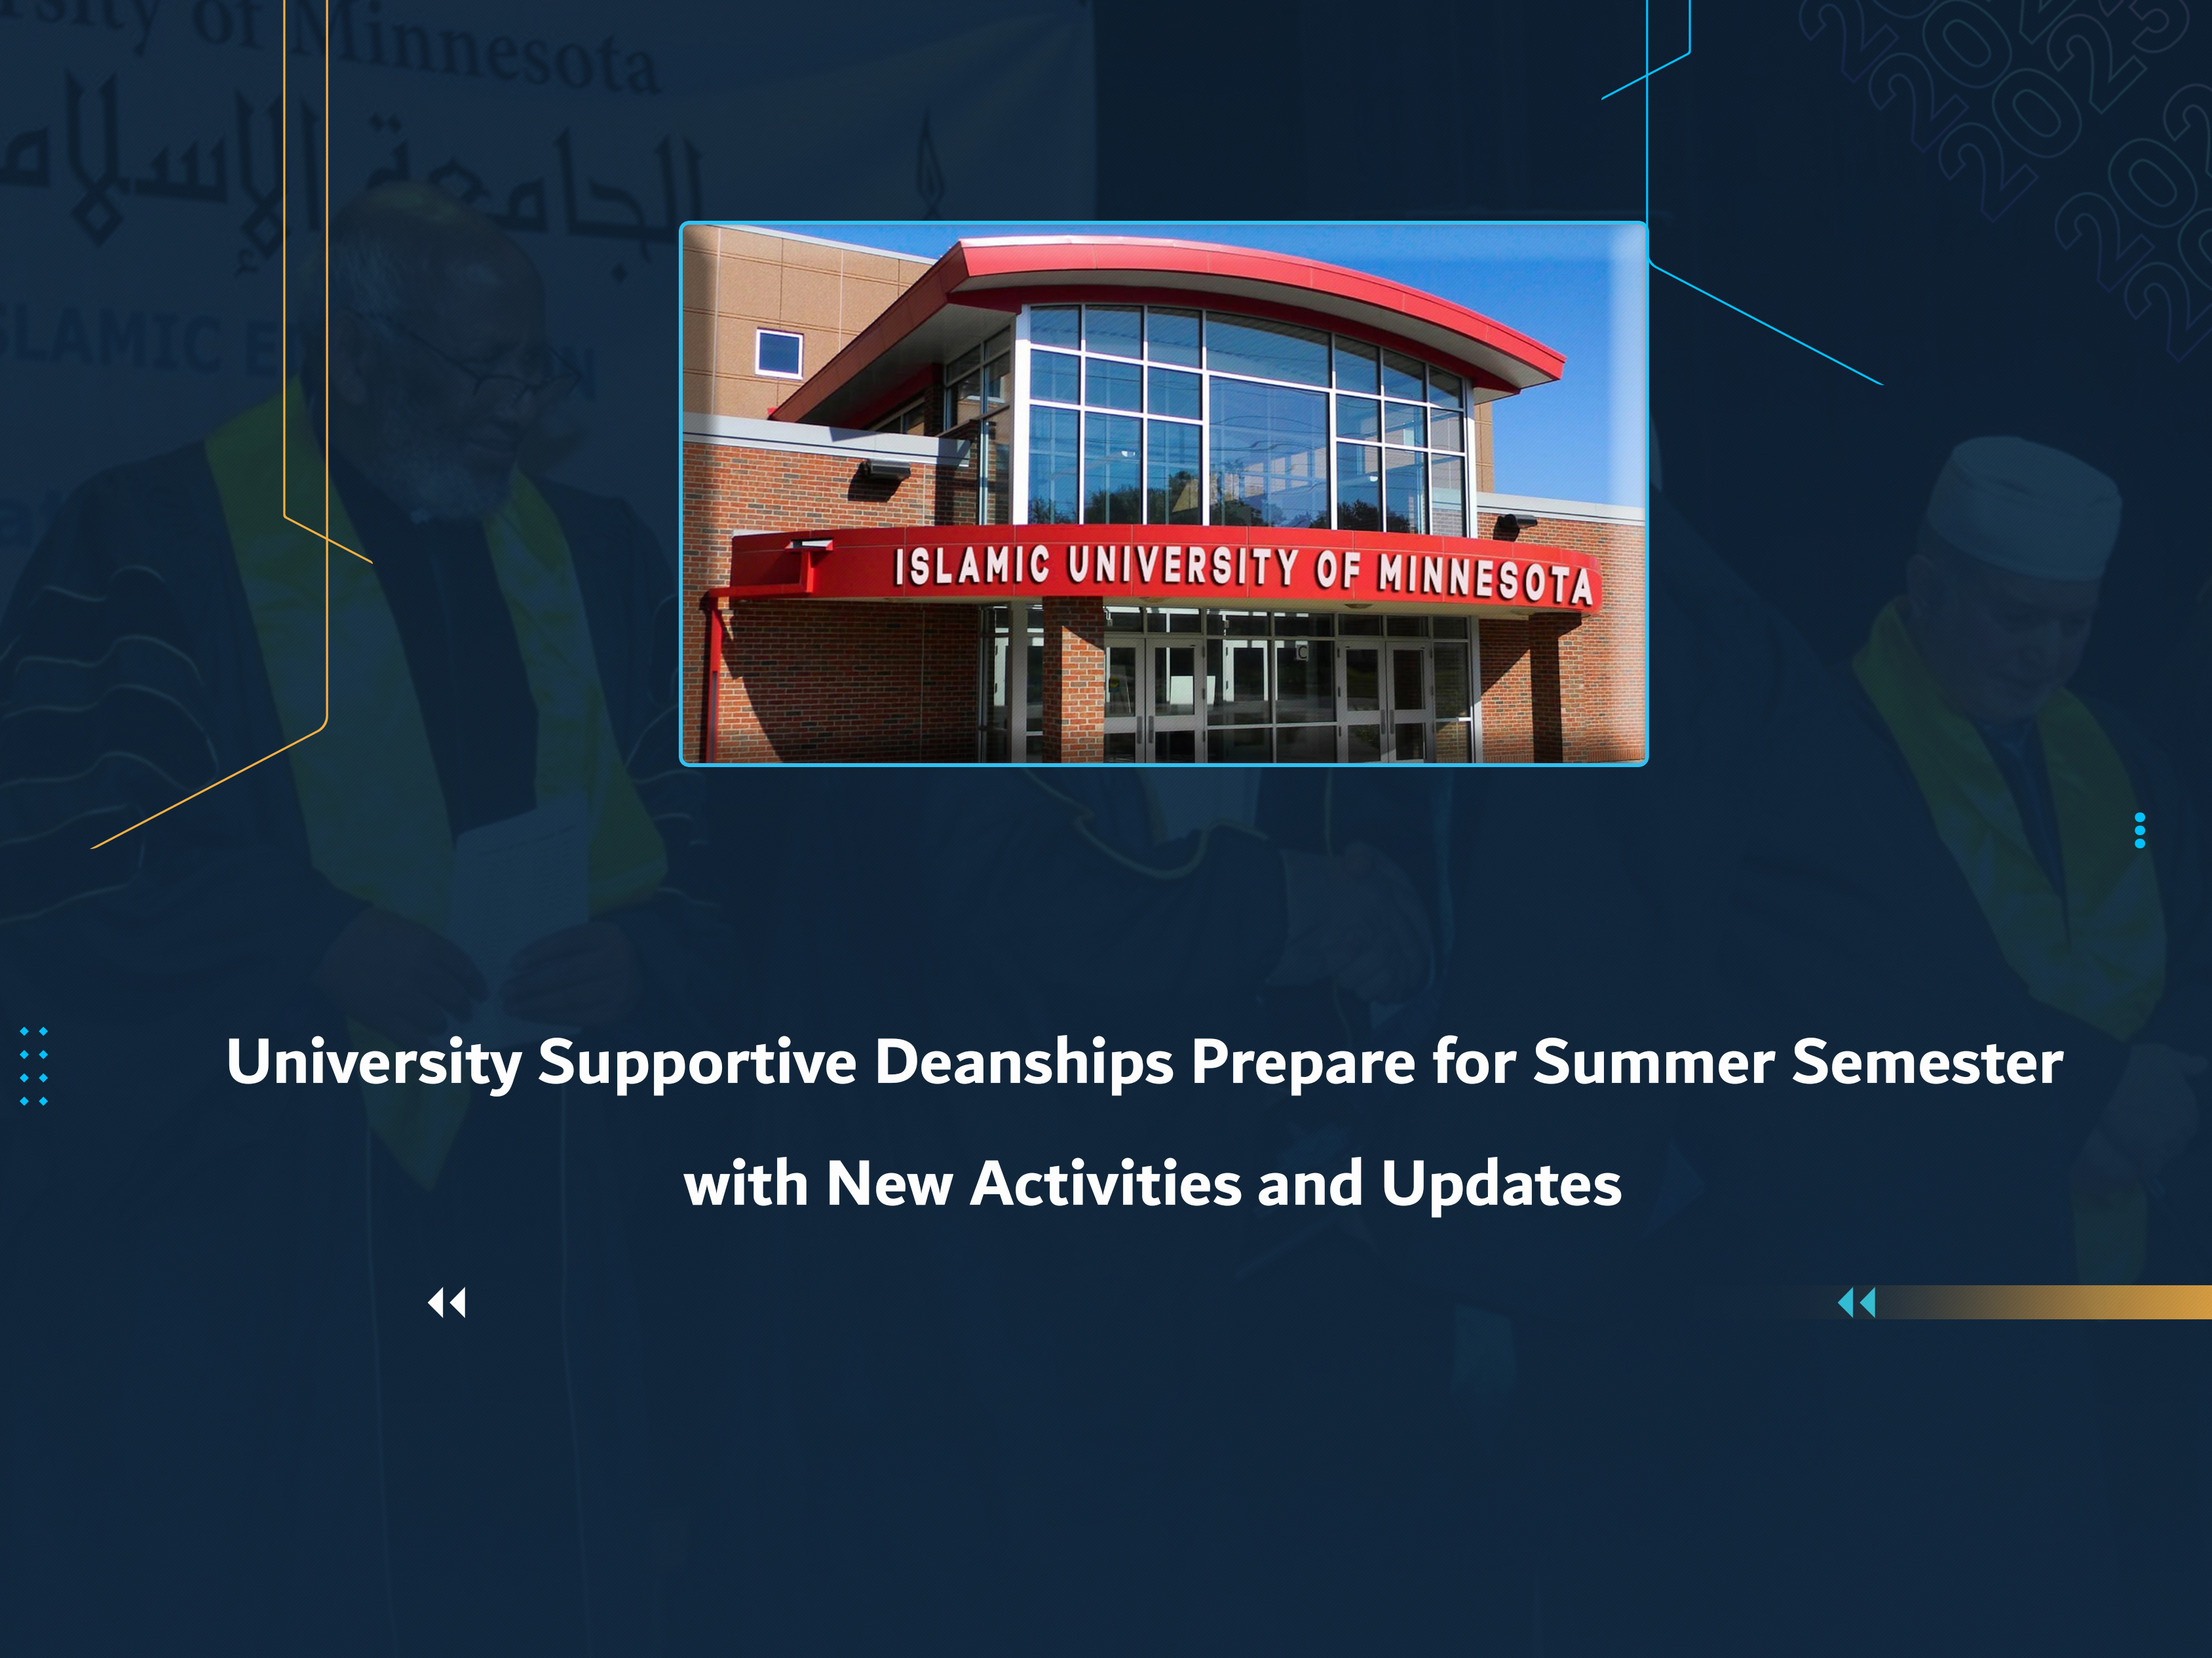 University Supportive Deanships Prepare for Summer Semester with New Activities and Updates